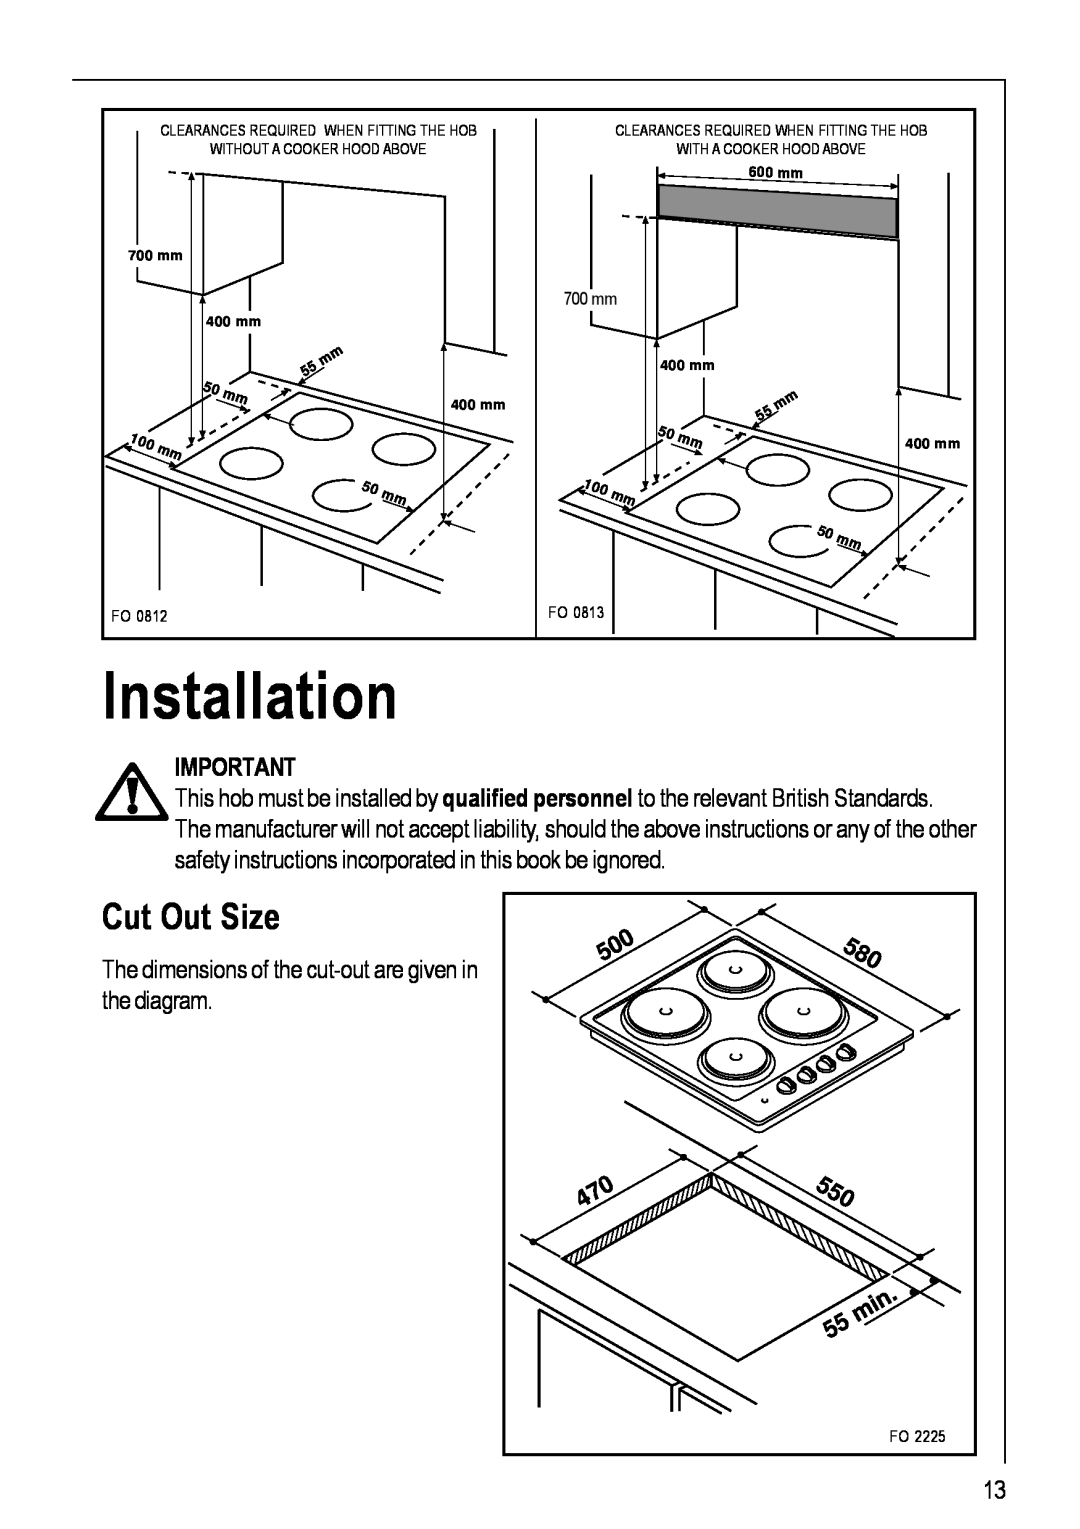 Electrolux 111 K operating instructions Cut Out Size, Installation 